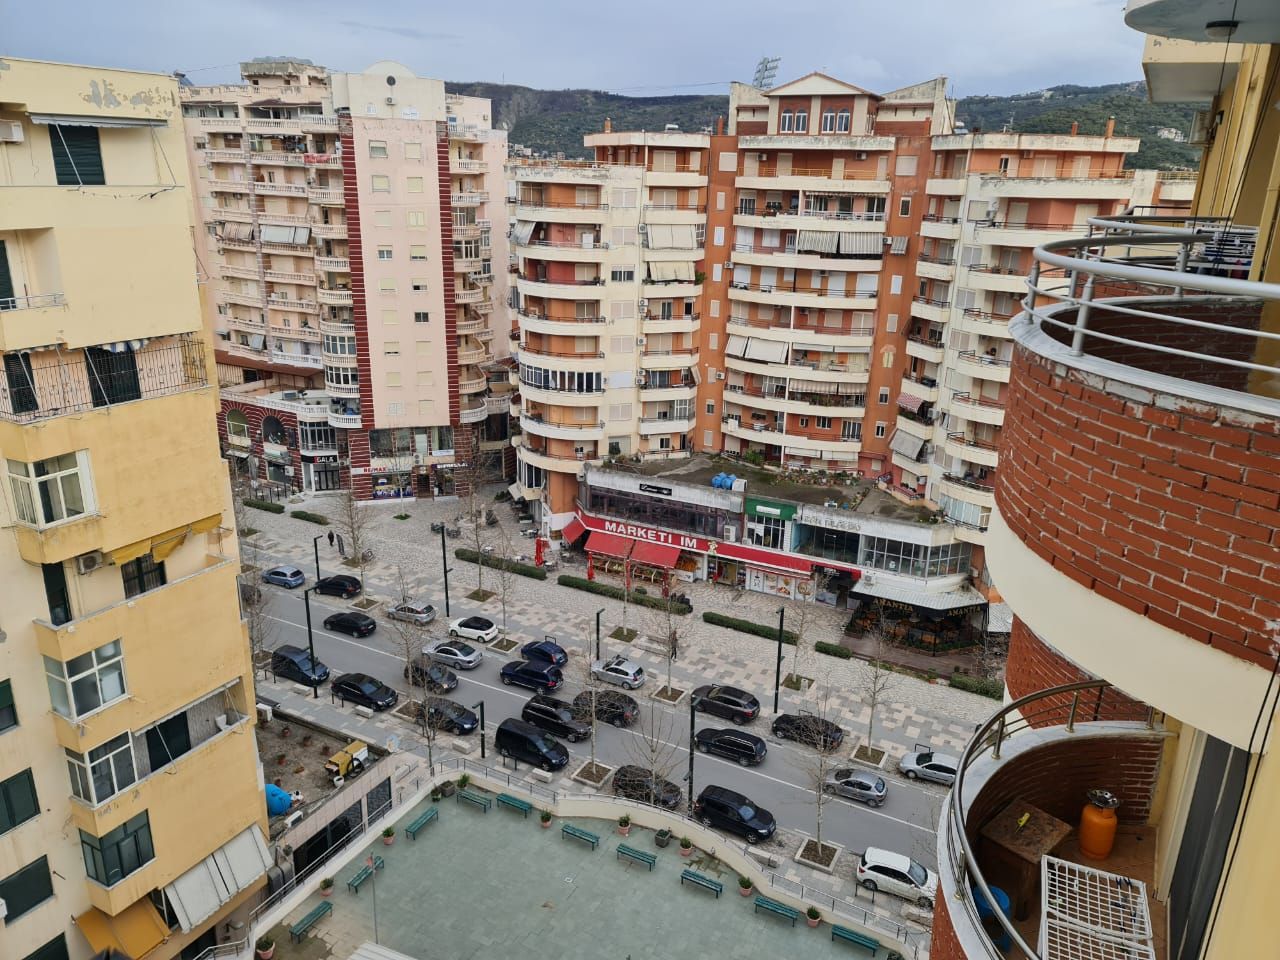 2 Bedroom Apartment In Vlore Albania For Sale 